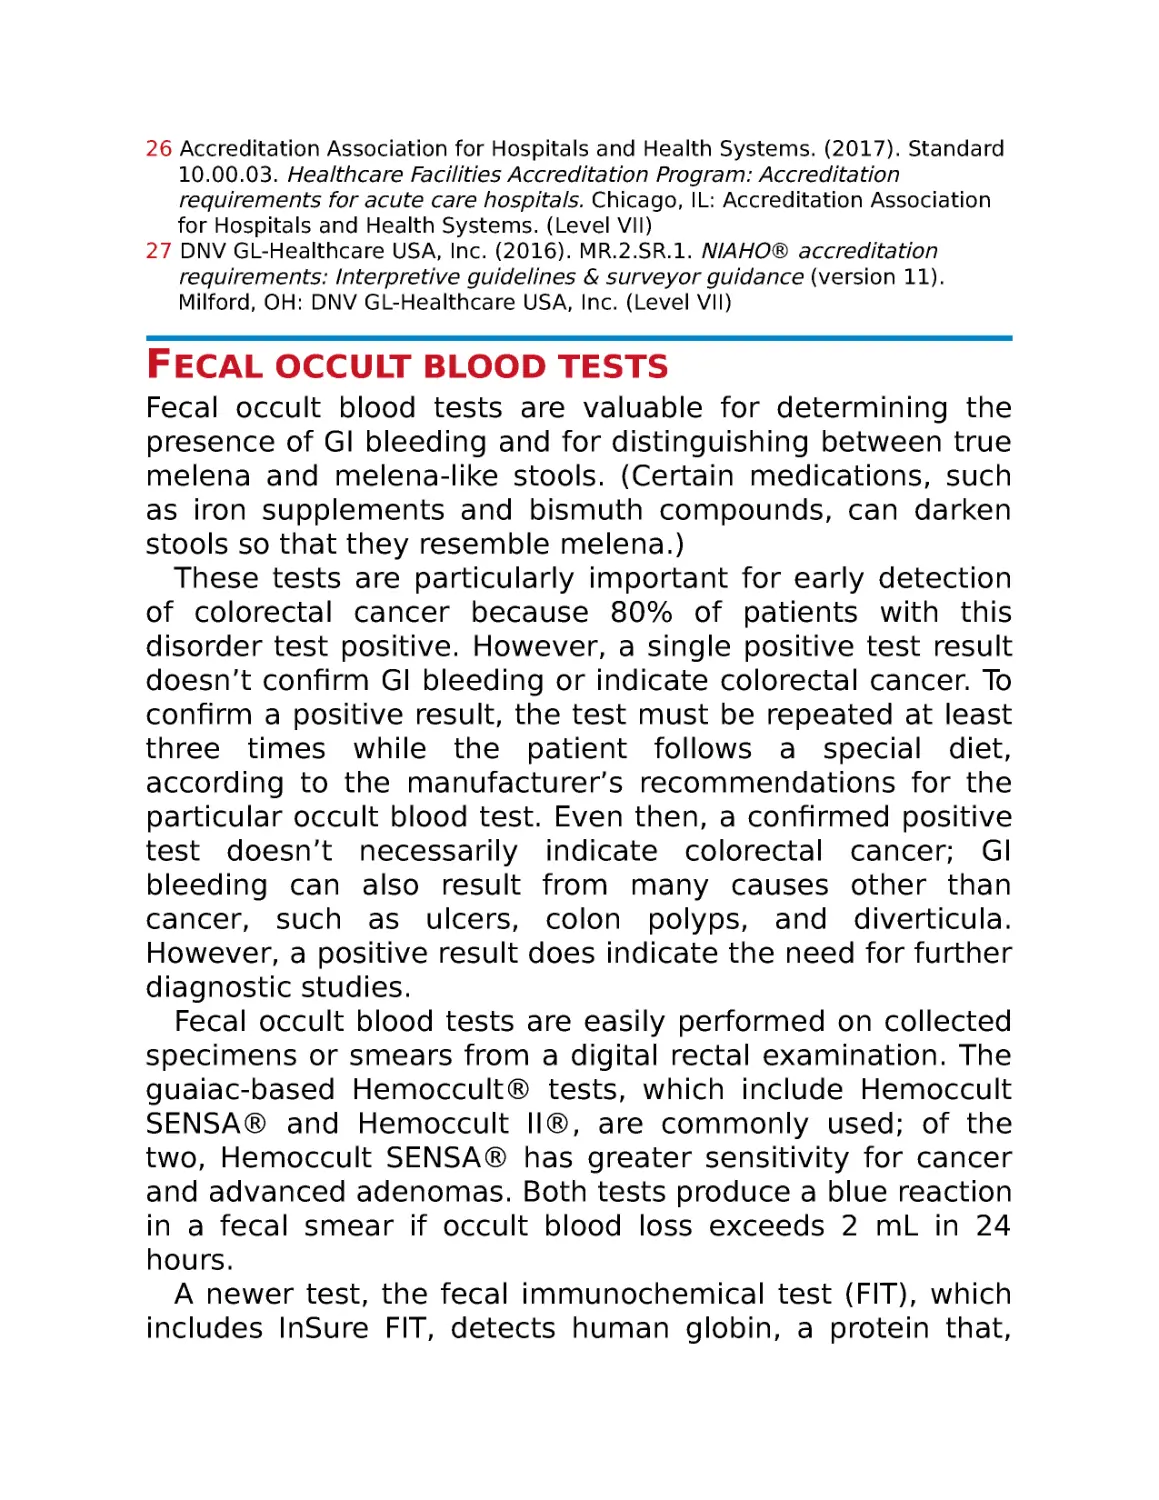 Fecal occult blood tests